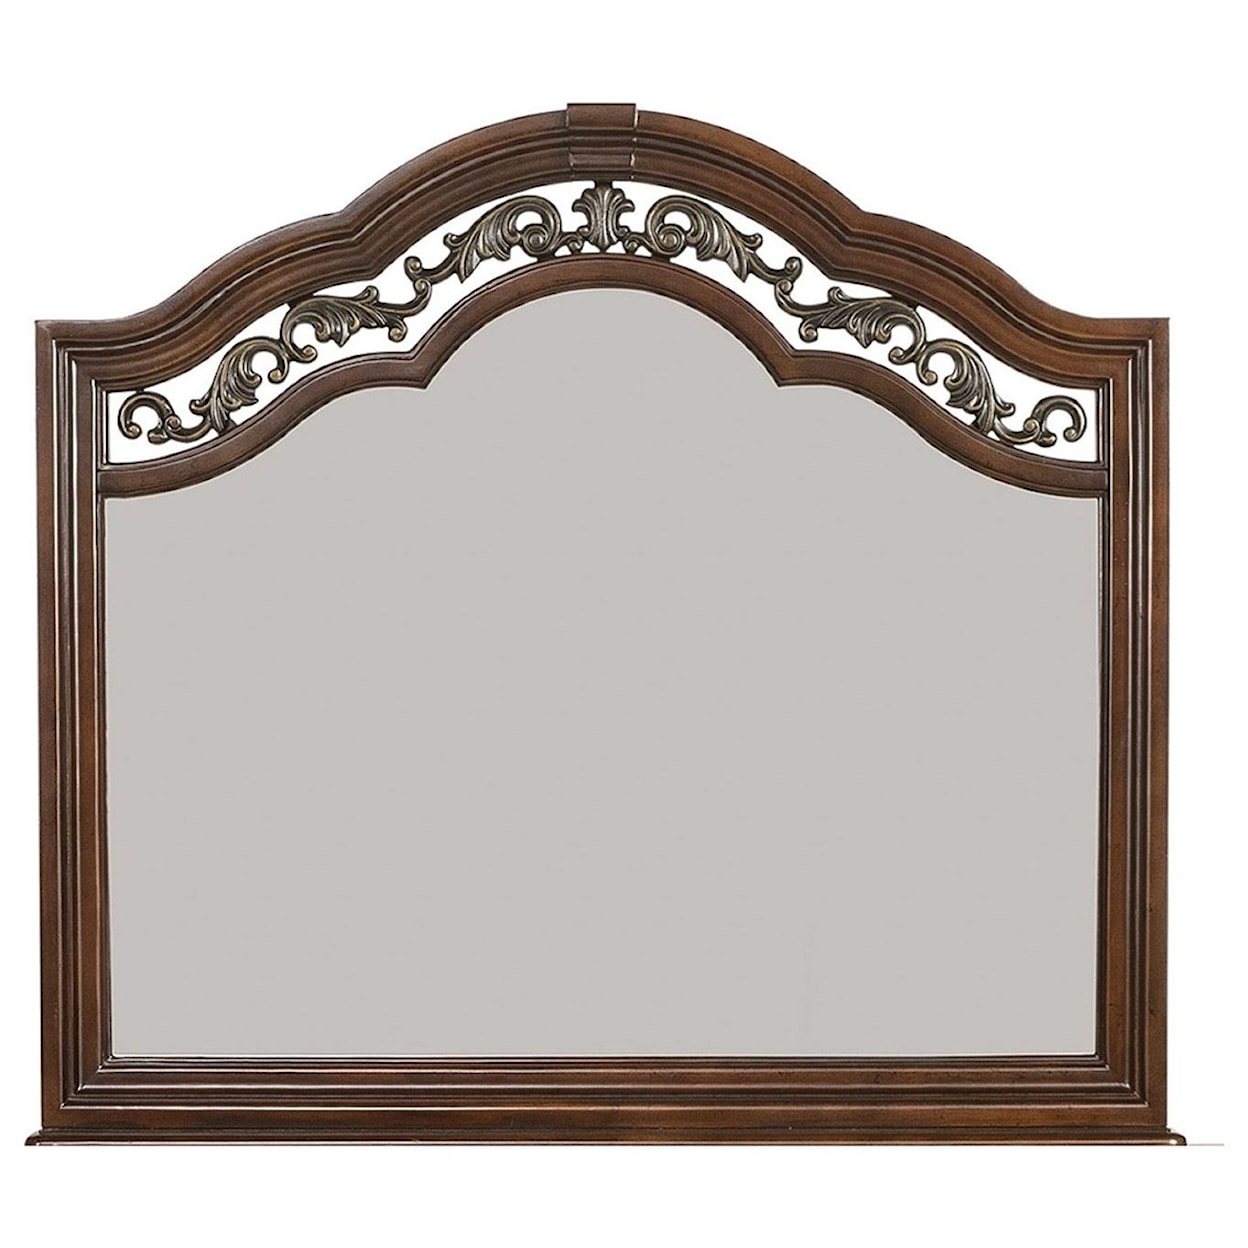 Libby Lenor Arched Dresser Mirror